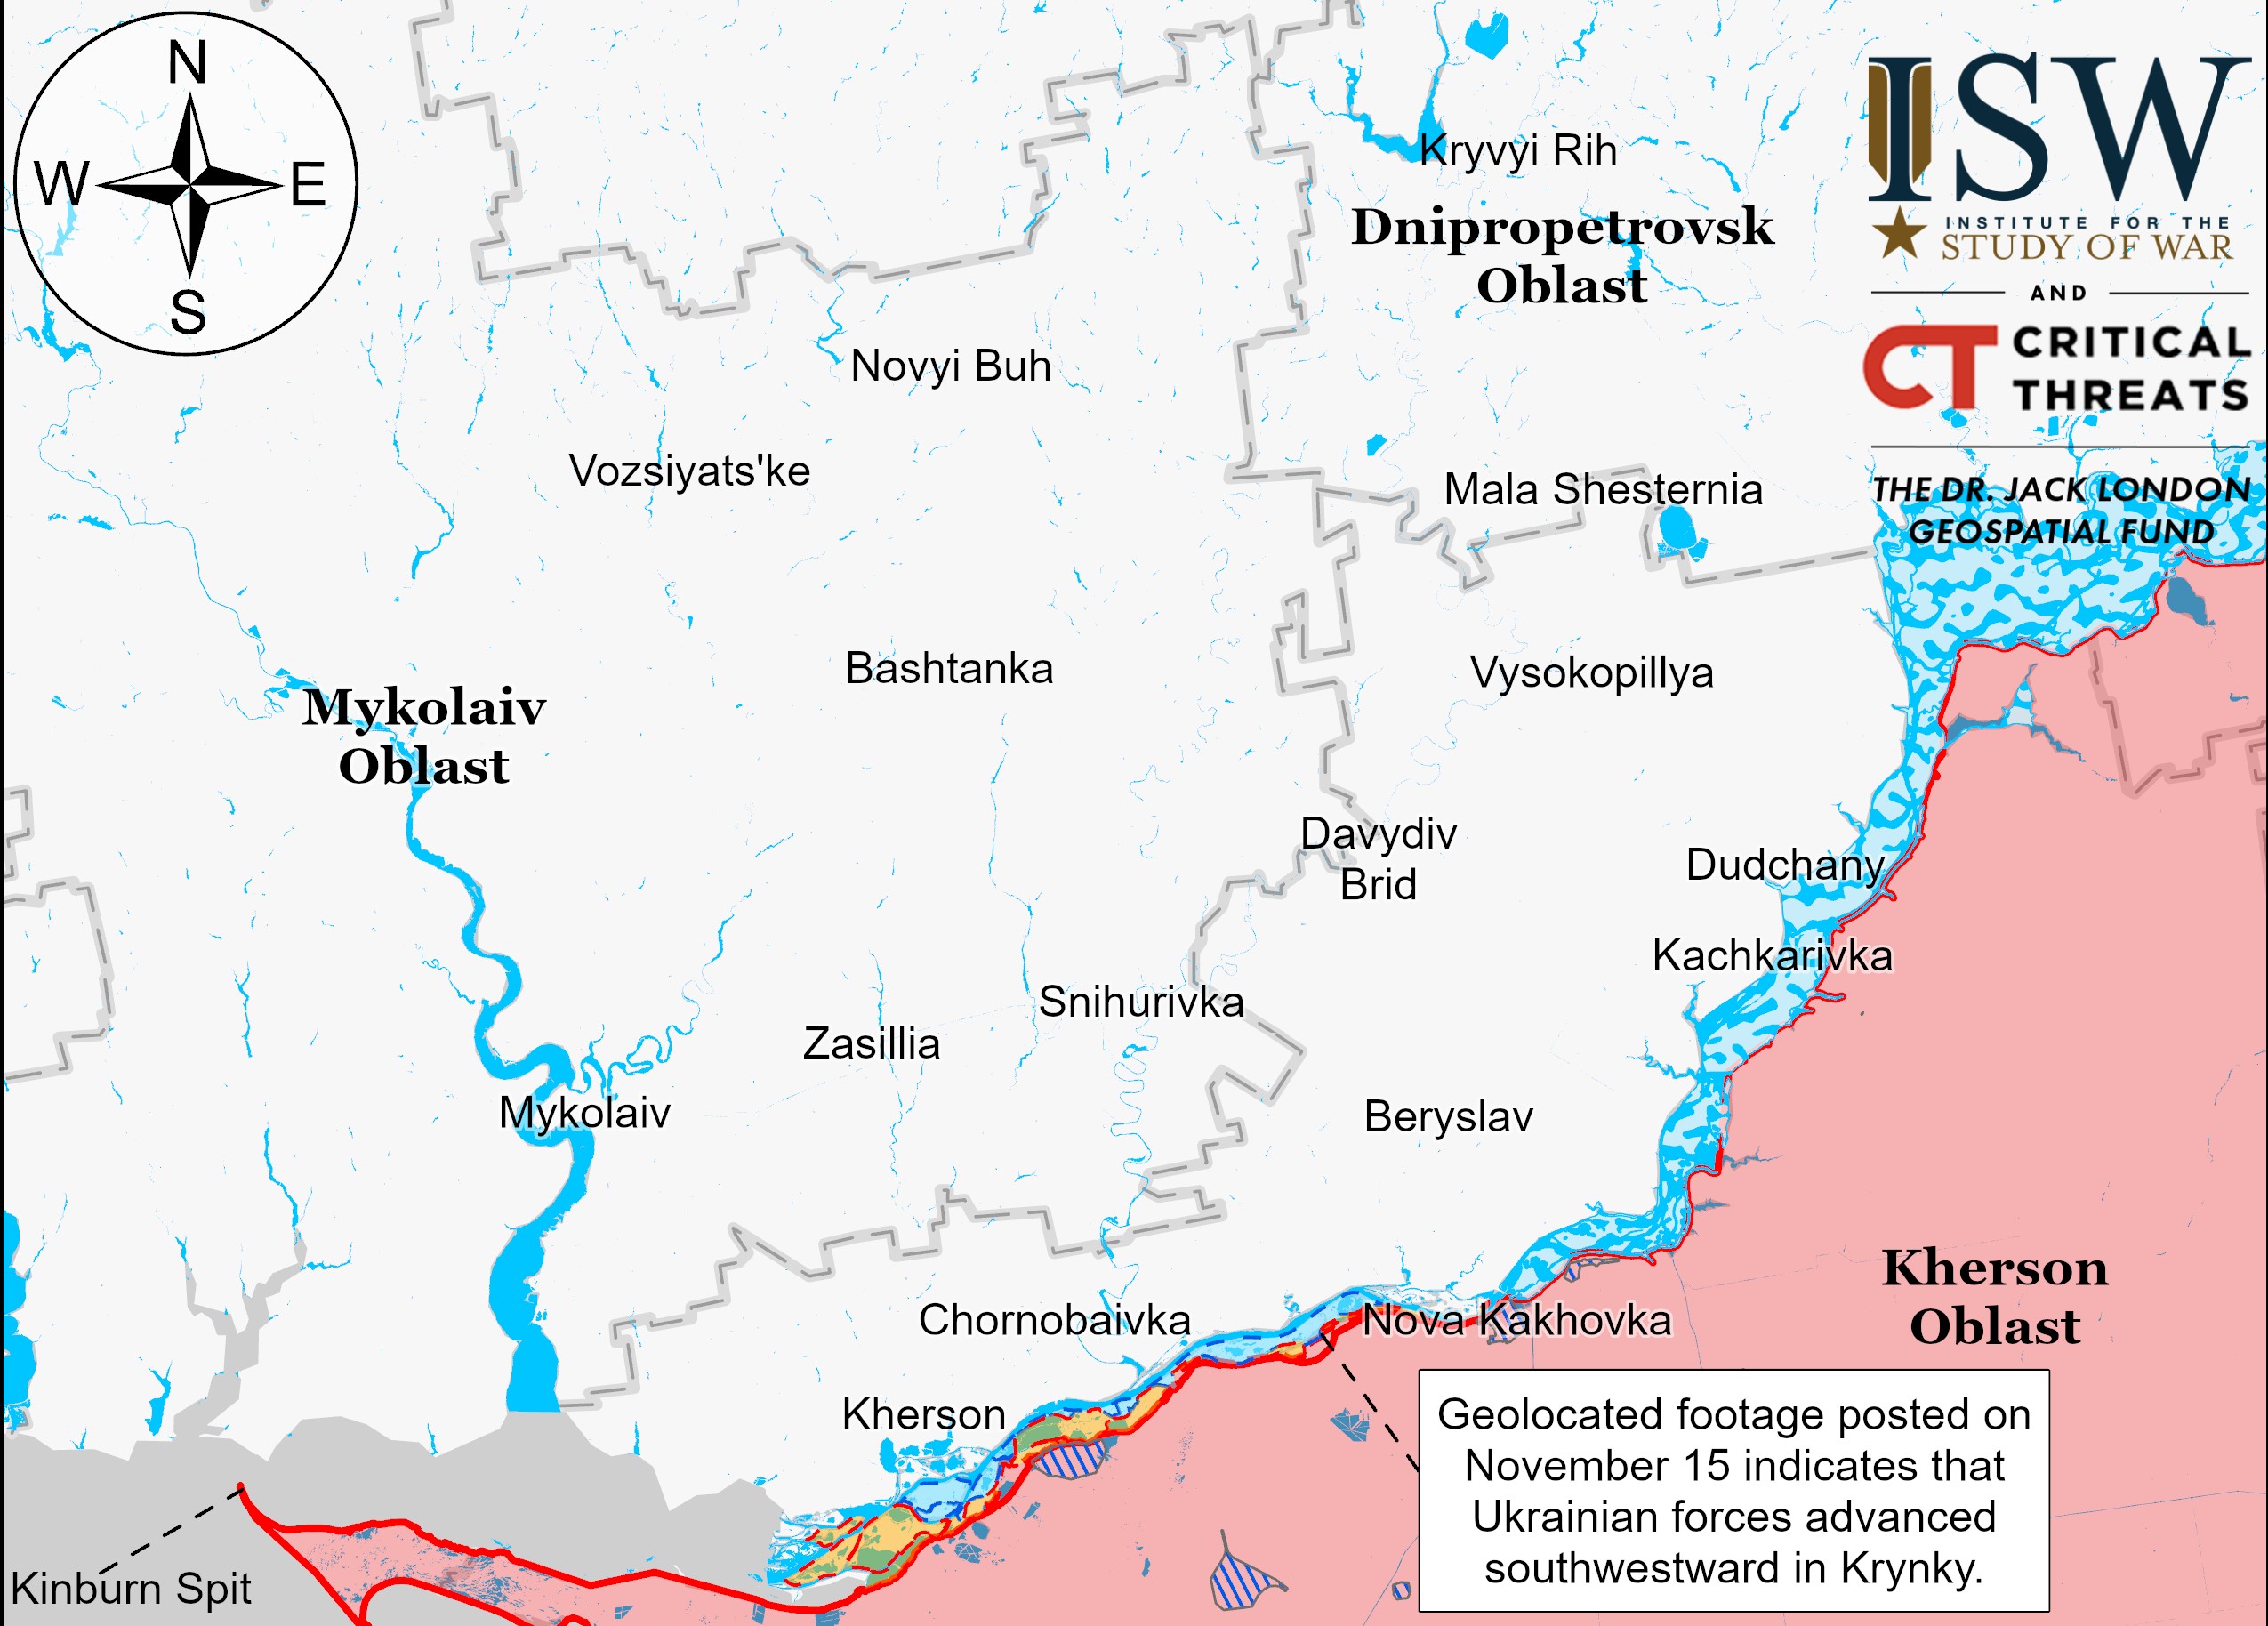 ISW: Ukraine prepares for ground operations on east bank of Dnipro River